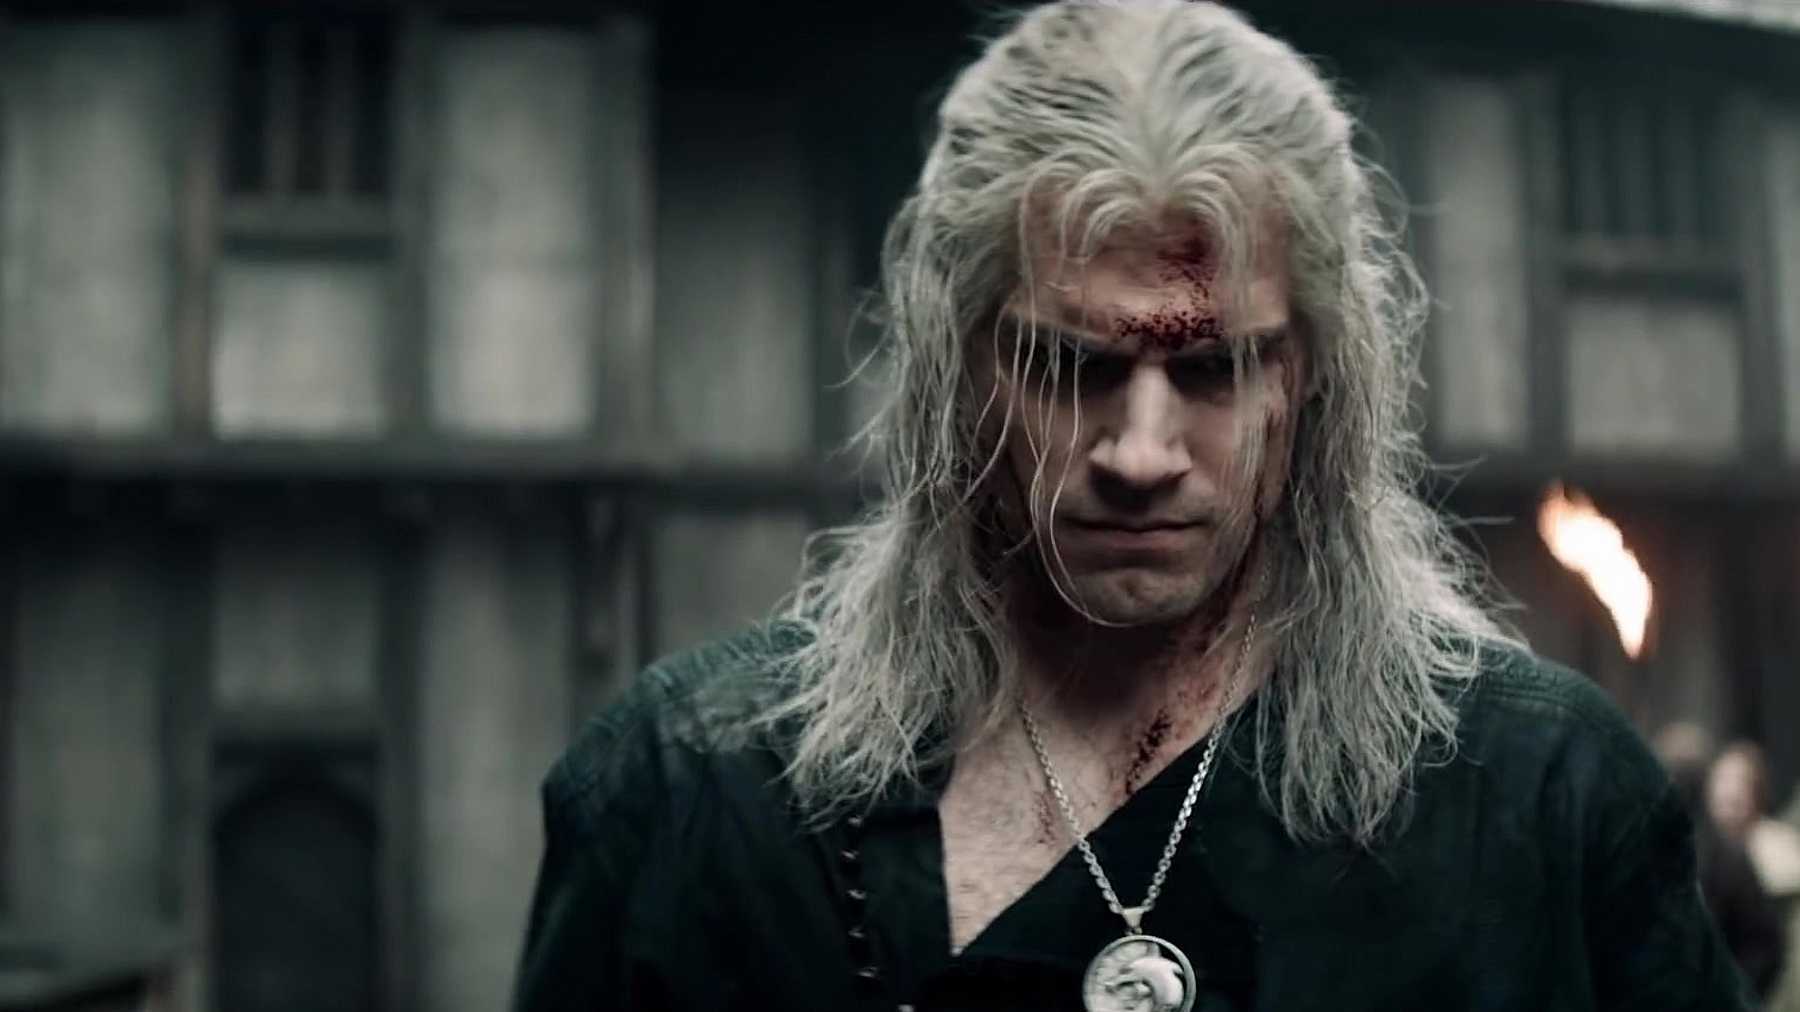 Henry Cavill is leaving The Witcher after seasons 3